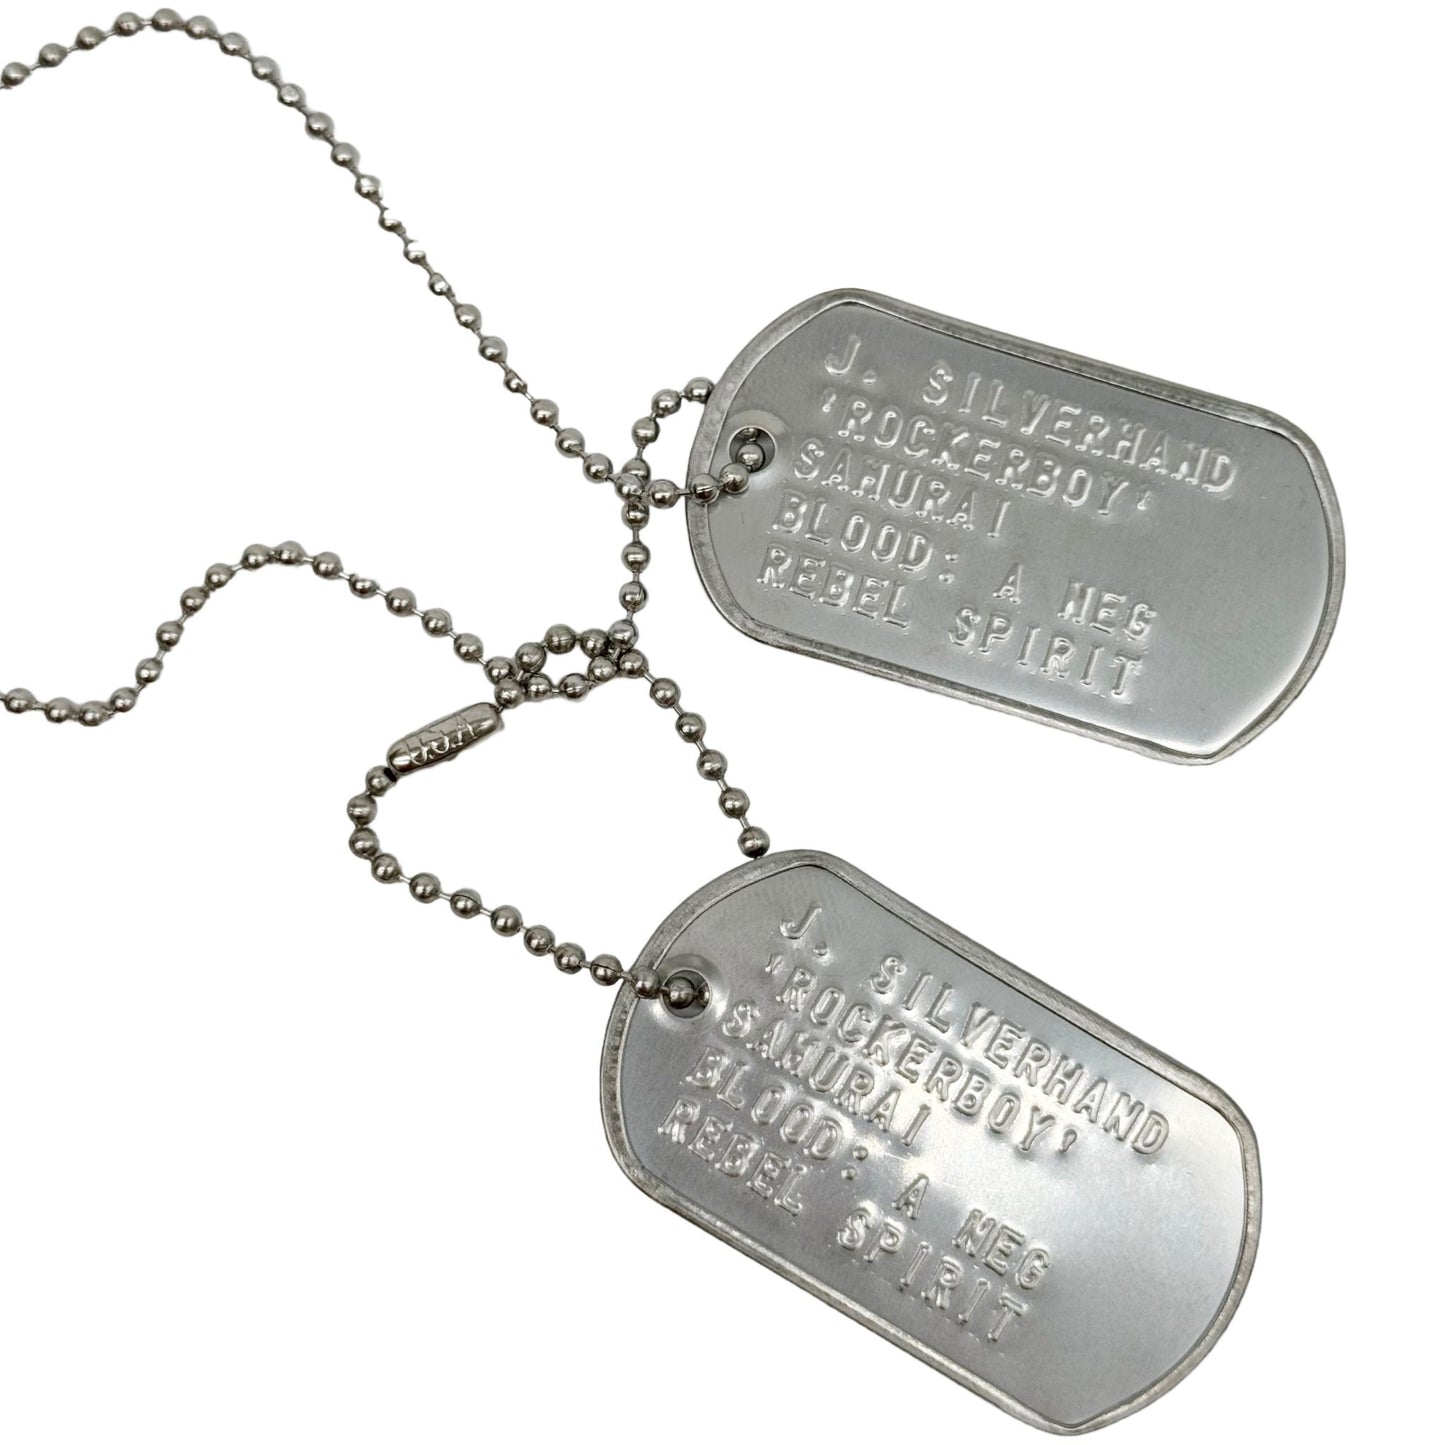 'J SILVERHAND' Military U.S DOG TAGS Necklace Cosplay Pendant Gaming Collector Inspired - TheDogTagCo